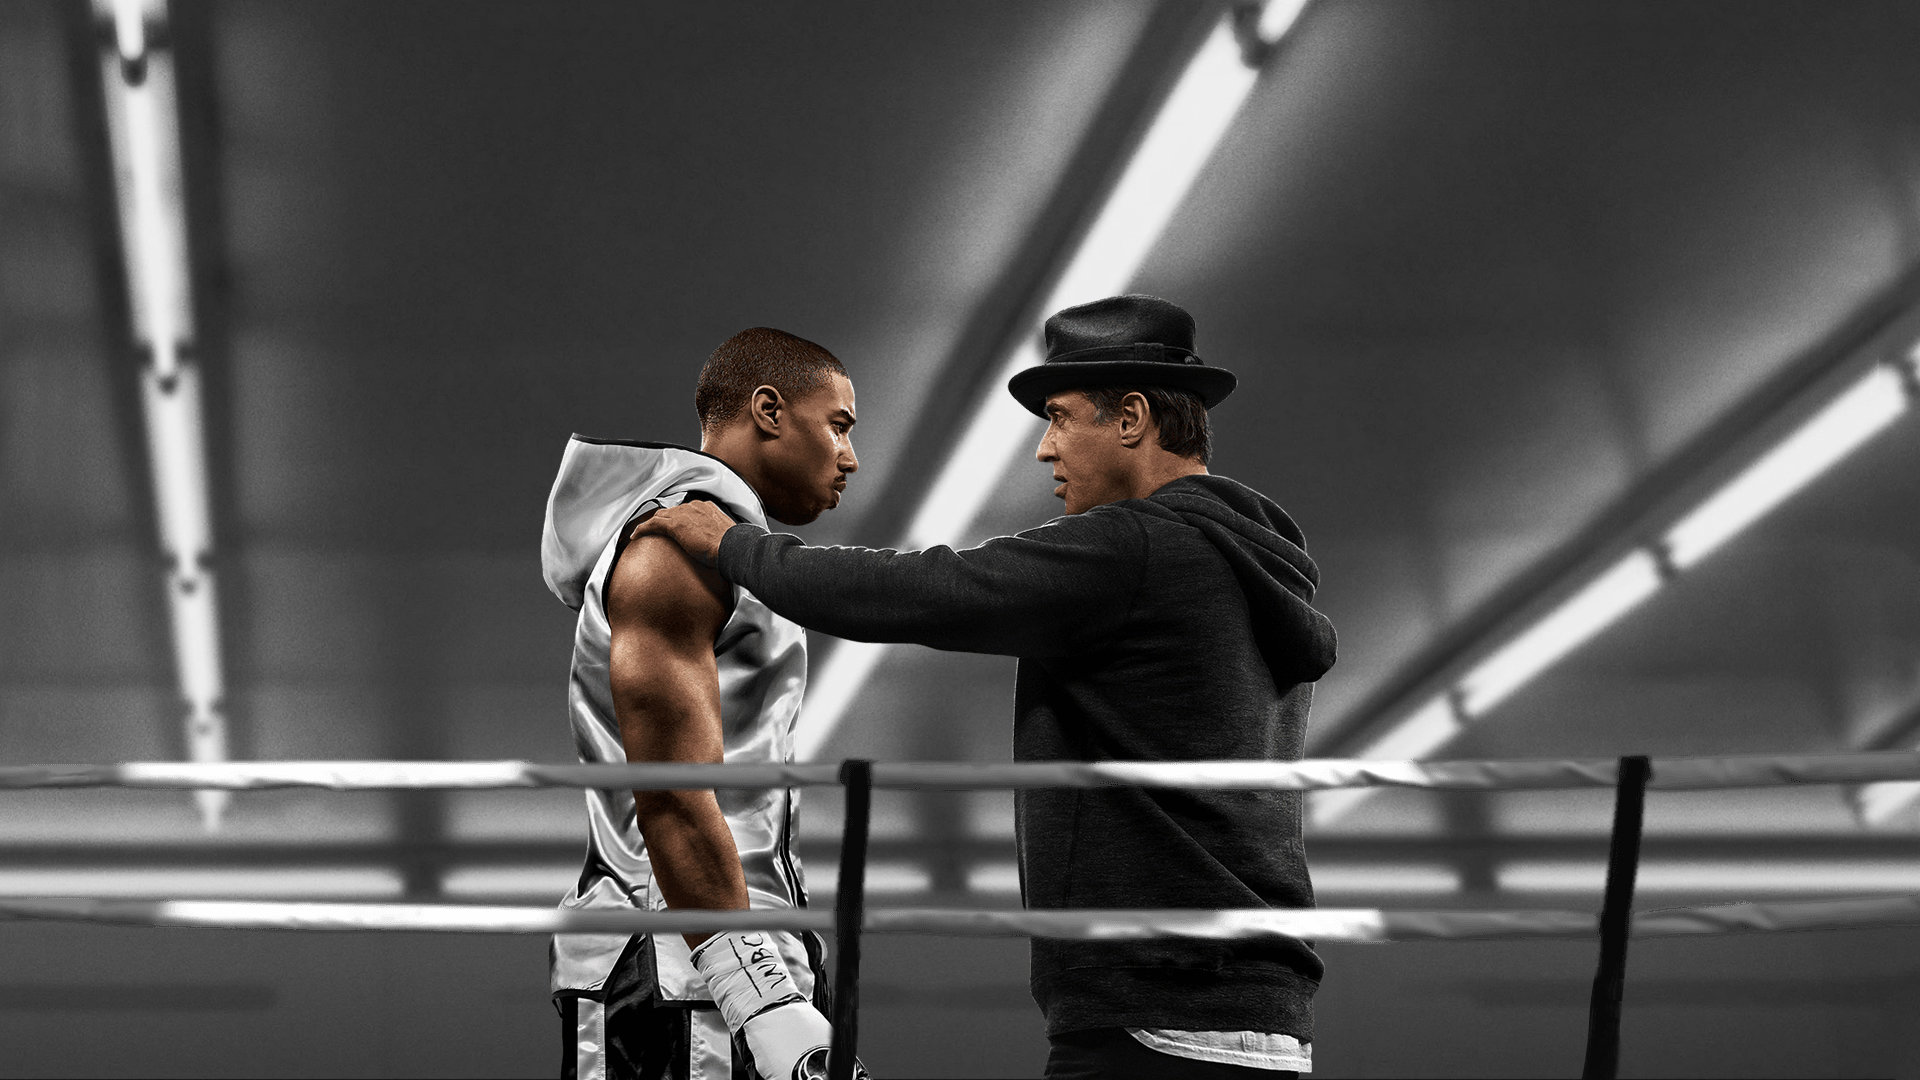 Download 1080p Creed desktop background ID:345859 for free